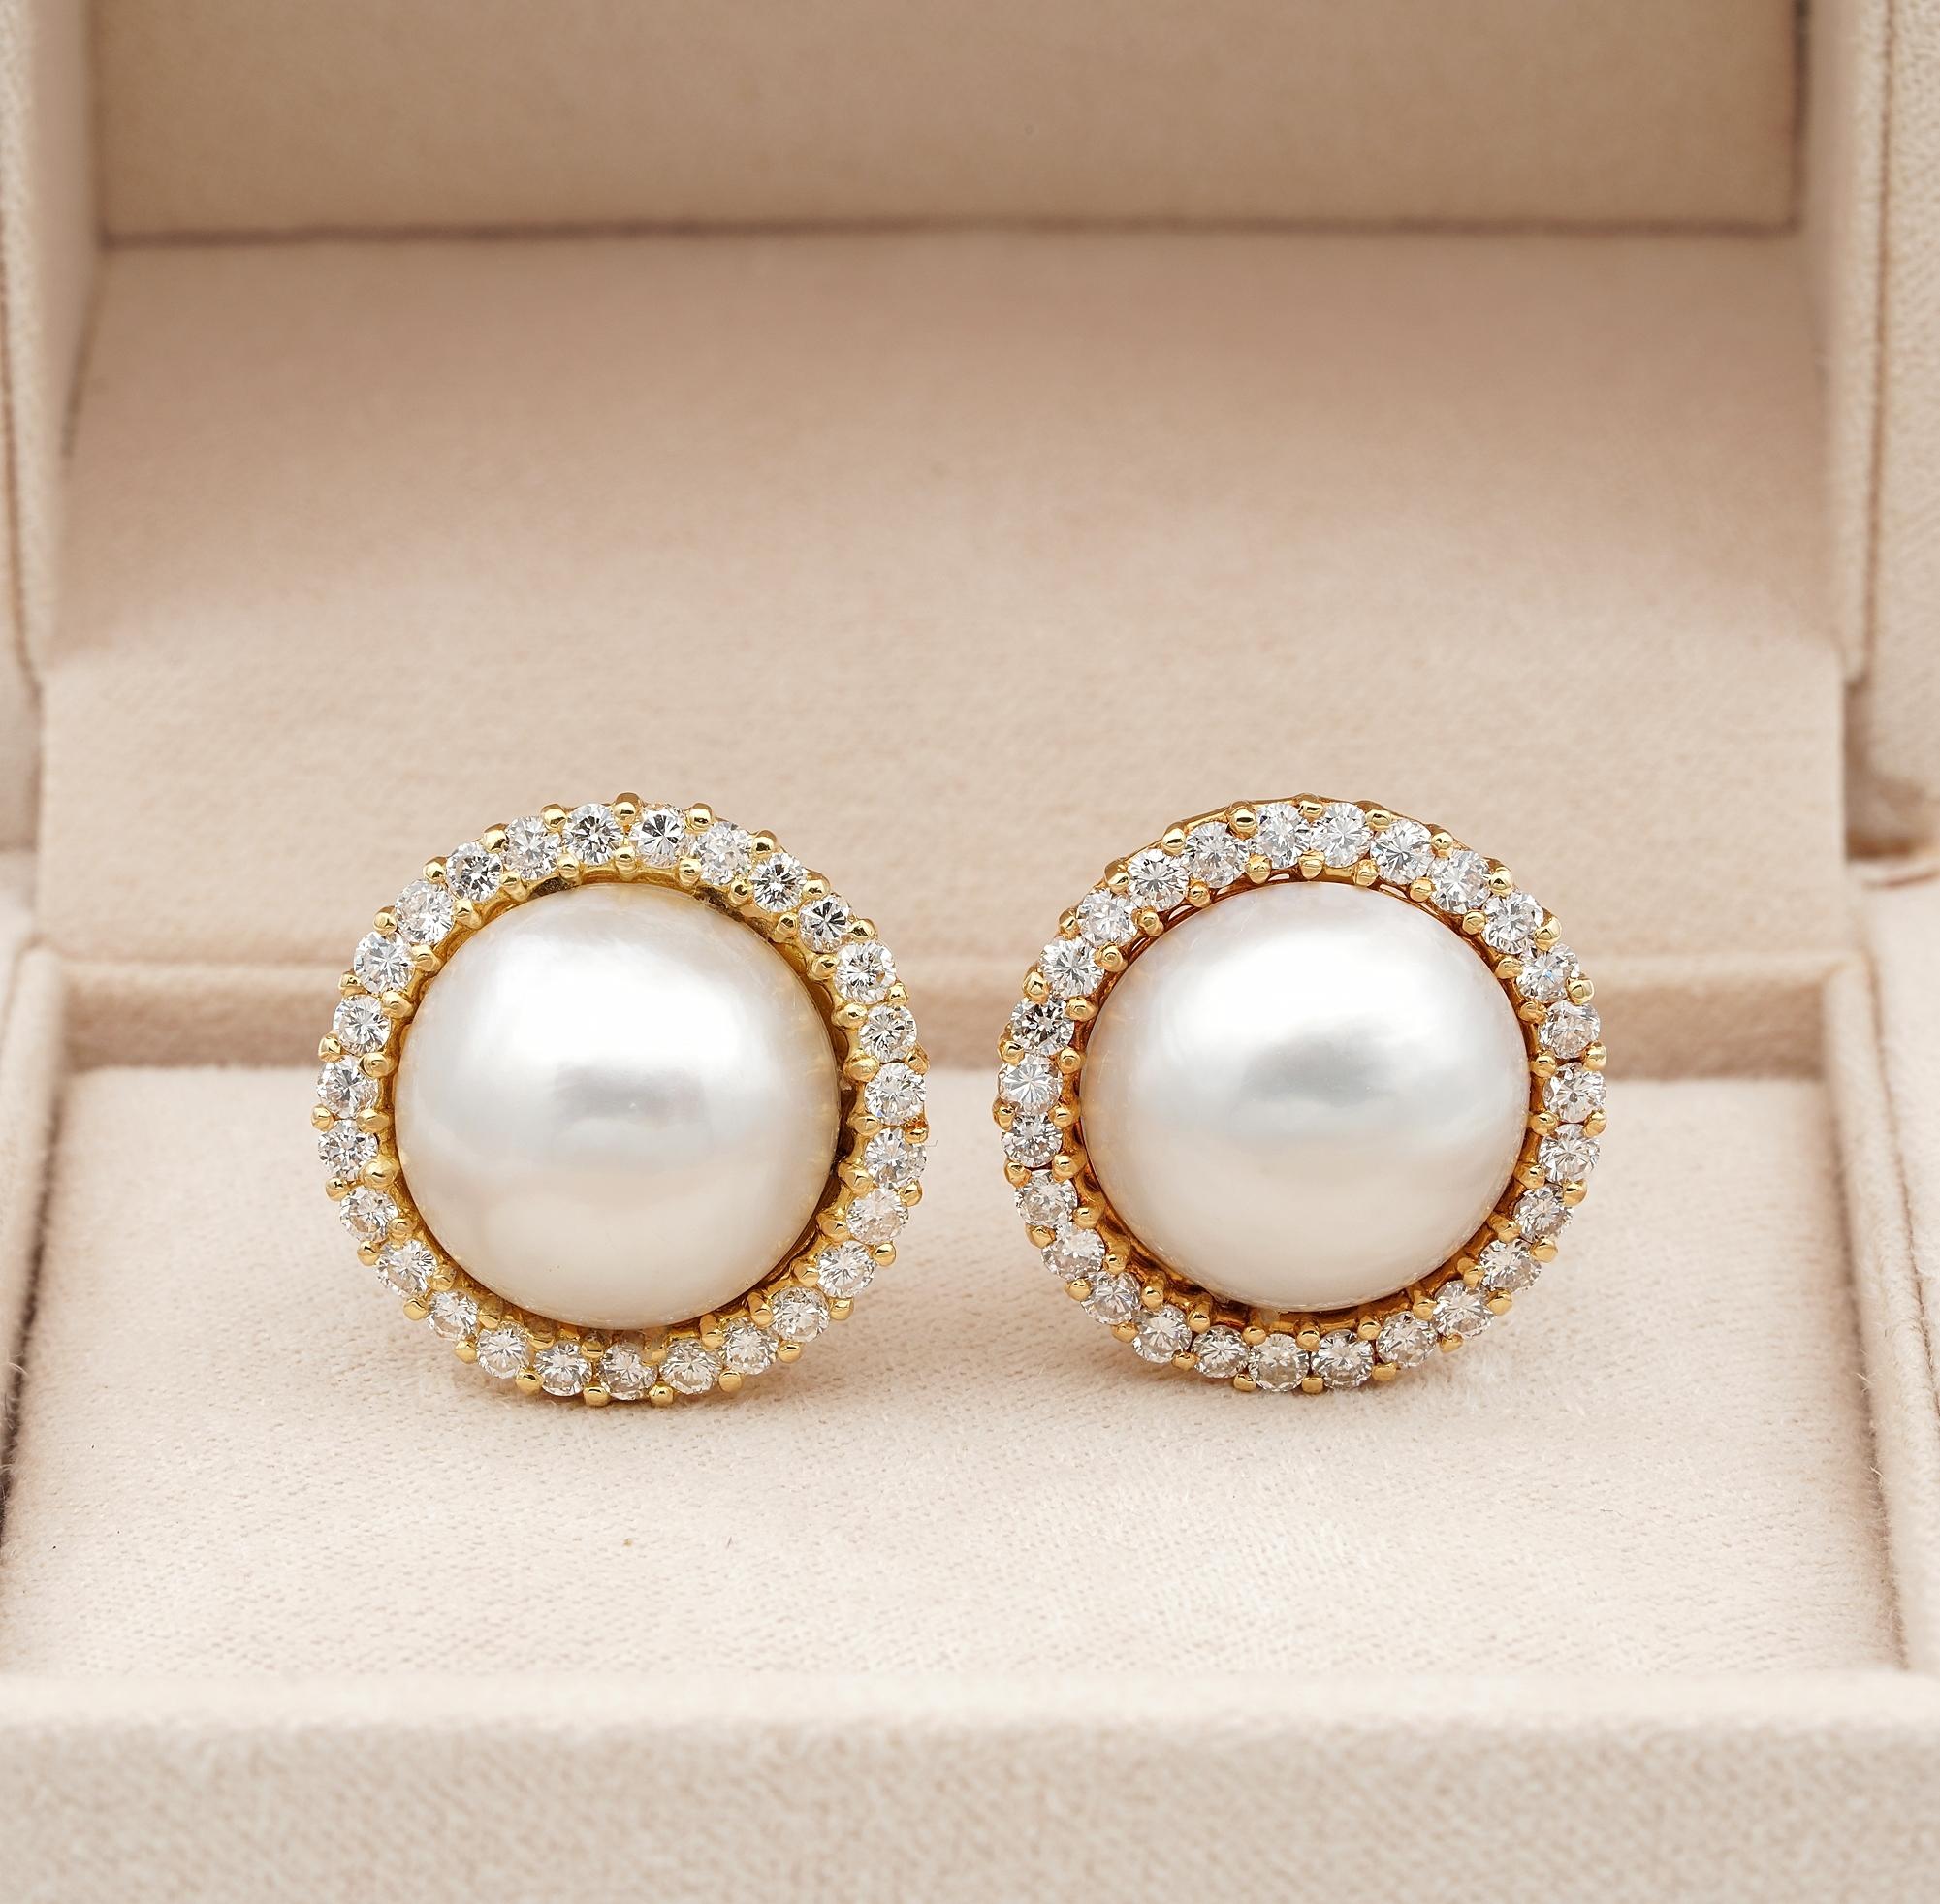 The Classy Must
High quality in all senses these vintage earrings bearing London Import Hallmarks for 1985 – individually hand crafted of solid 18 KT gold
Boasting magnificent workmanship throughout, substantially hand made even the pearls backing